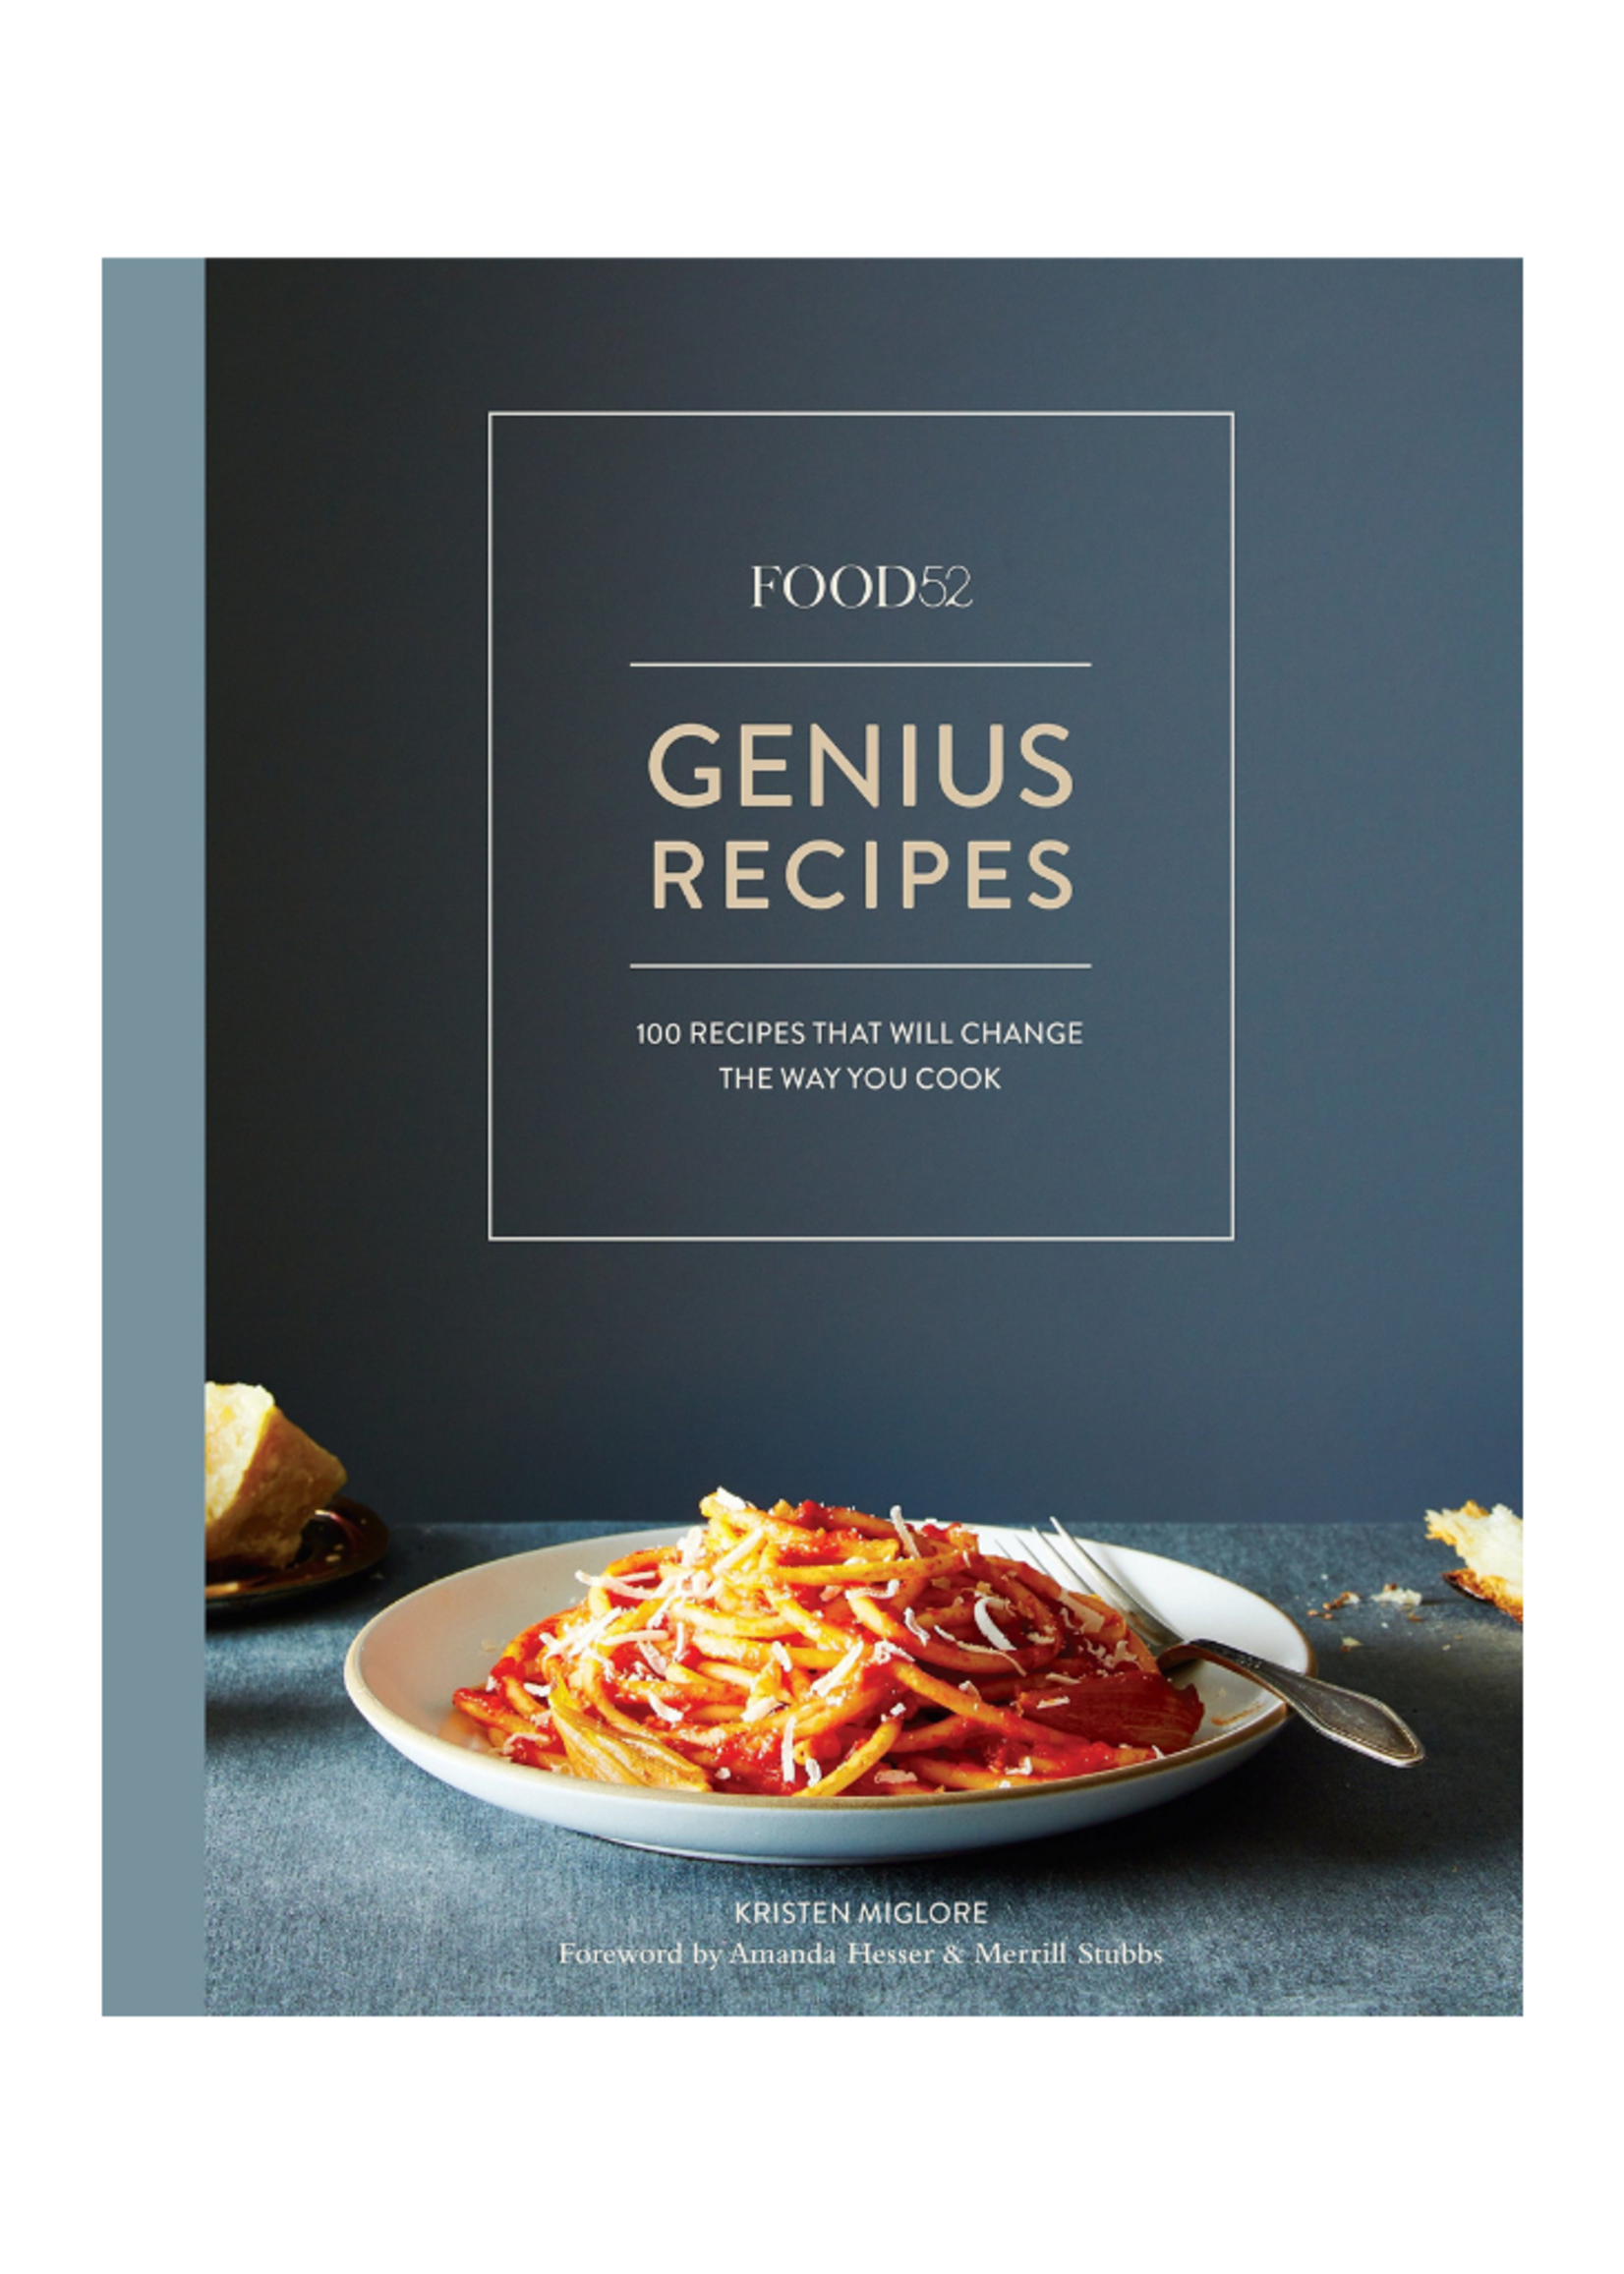 Random House Food52 Genius Recipes: 100 Recipes That Will Change the Way You Cook by Kristen Miglore